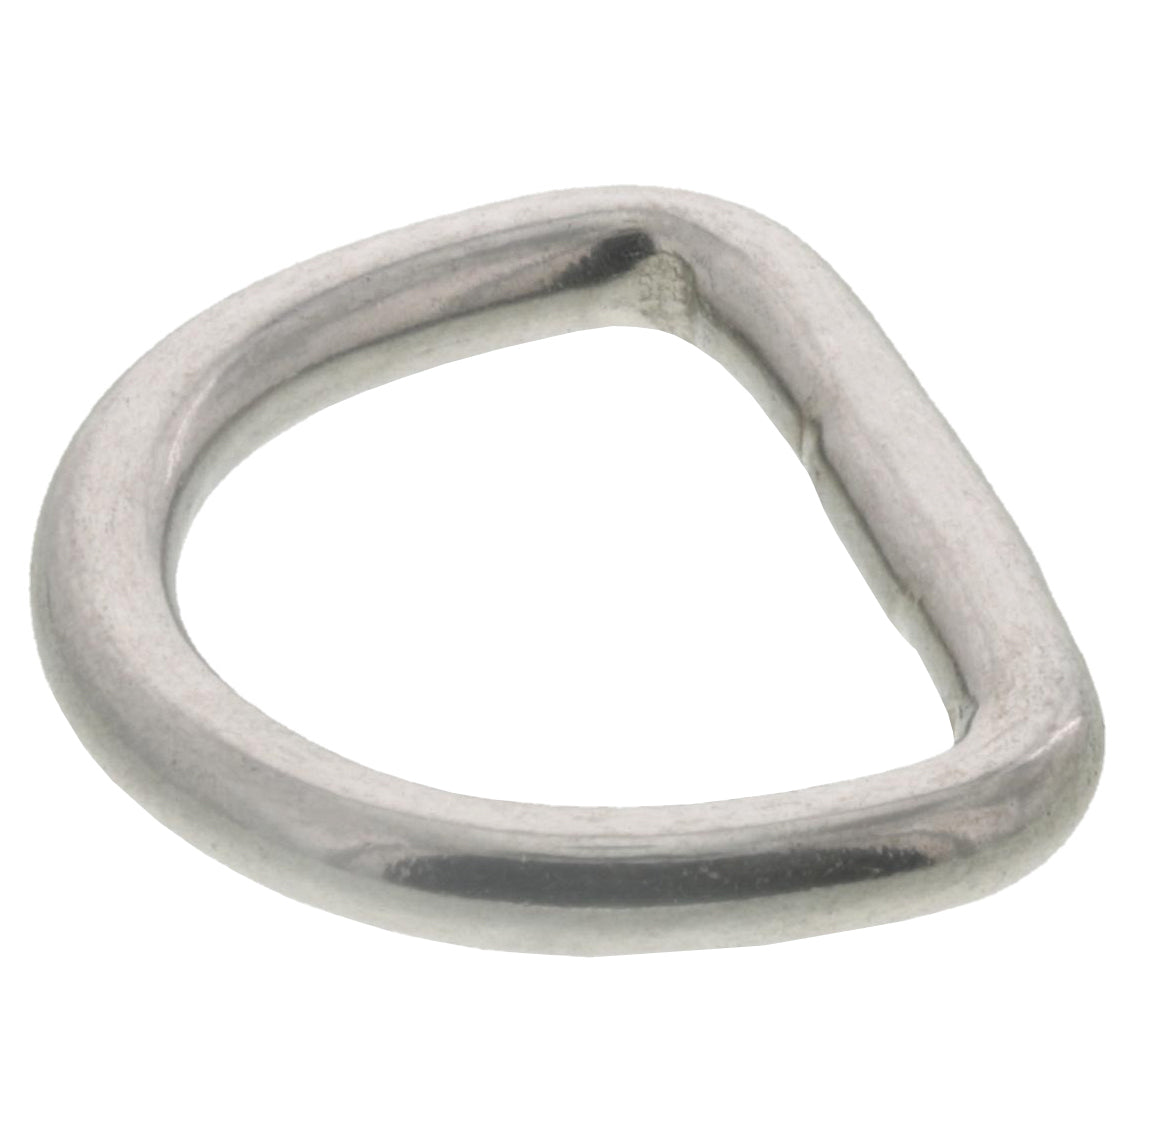 Stainless Steel 316 D Ring 1/8 x 1 (3mm x 25mm) Marine Grade